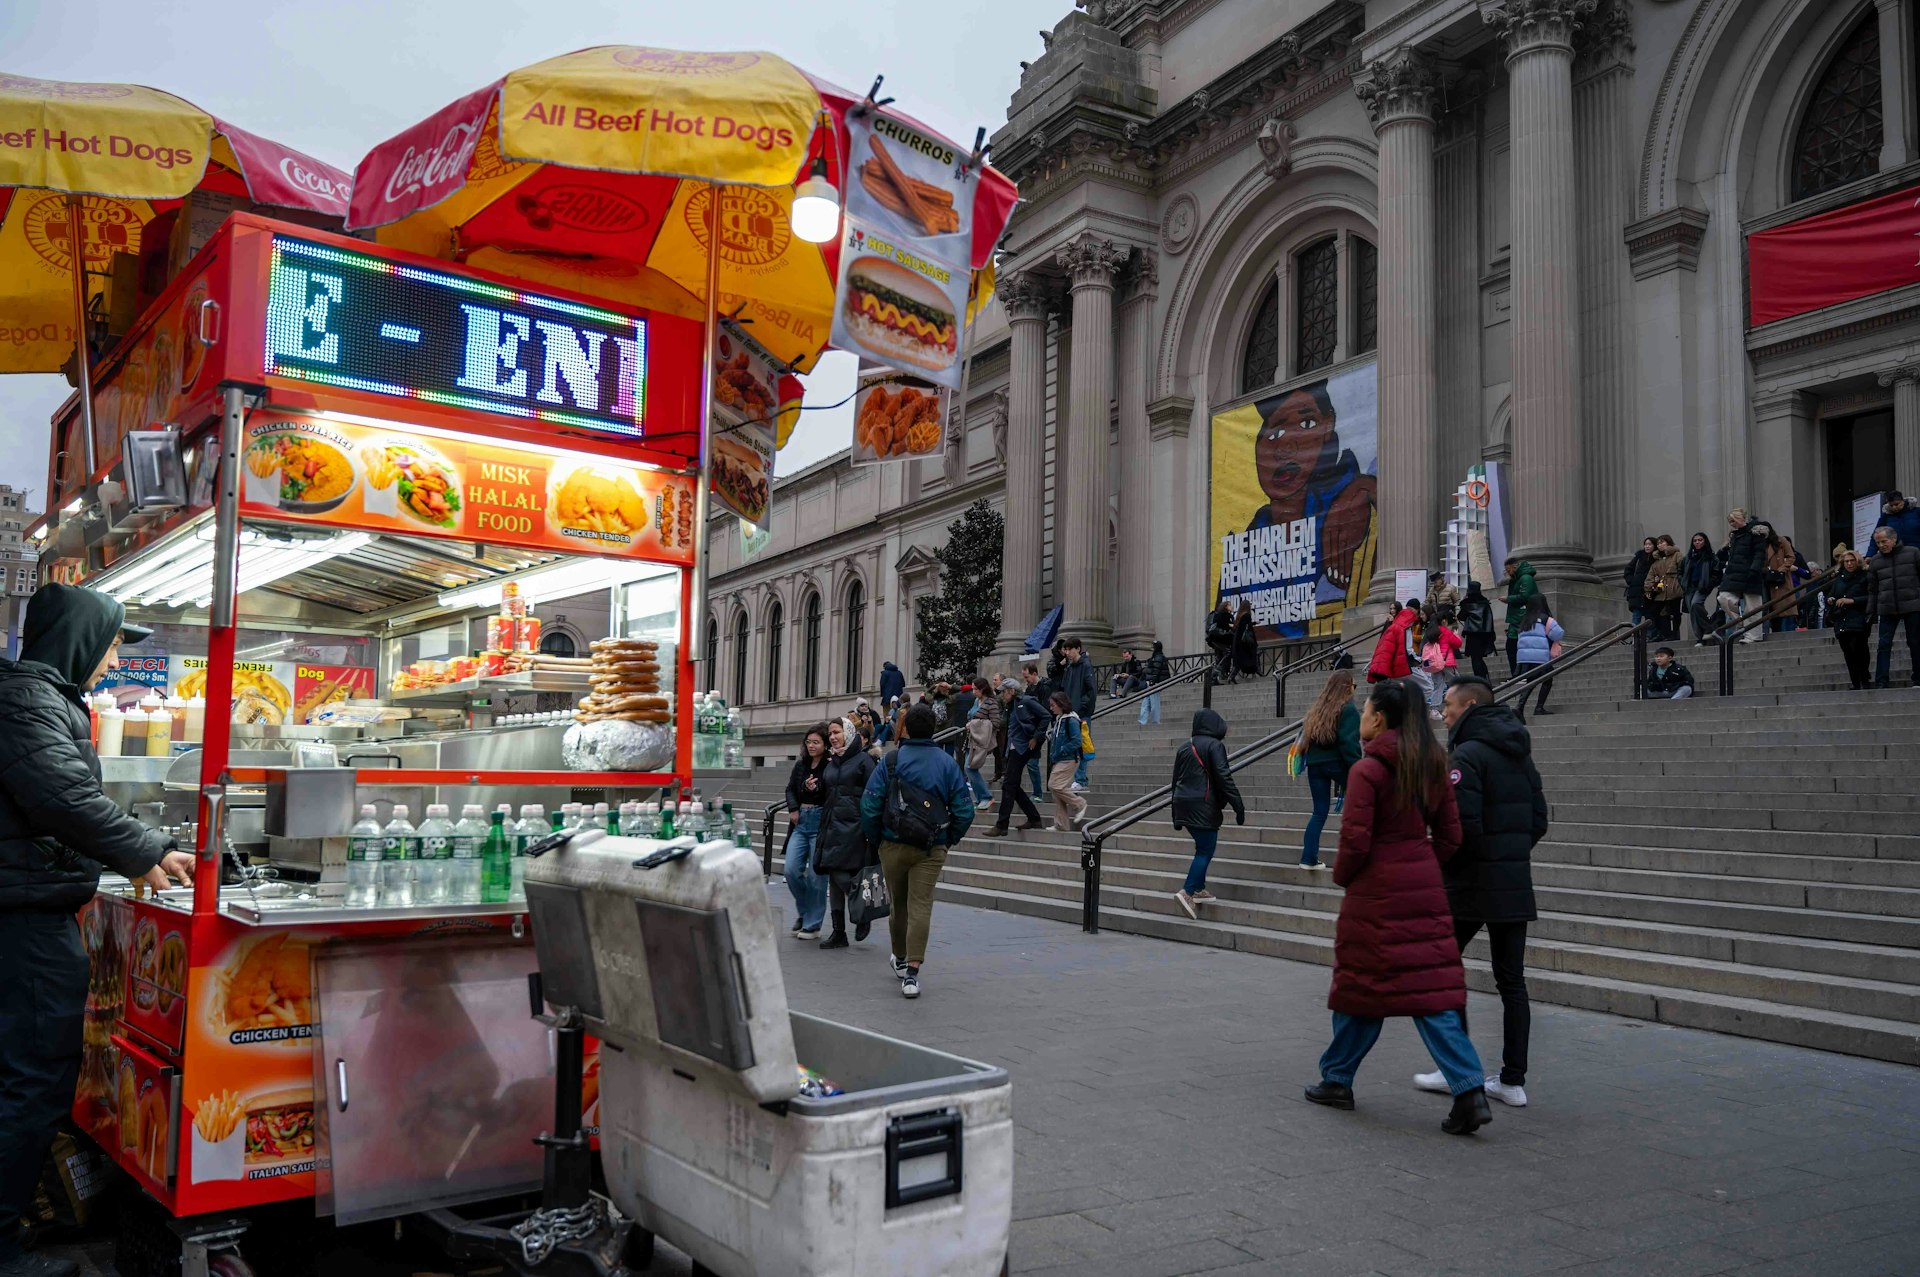 A food cart vendor in front of the Metropolitan Museum of Art, New York City, New York, USA